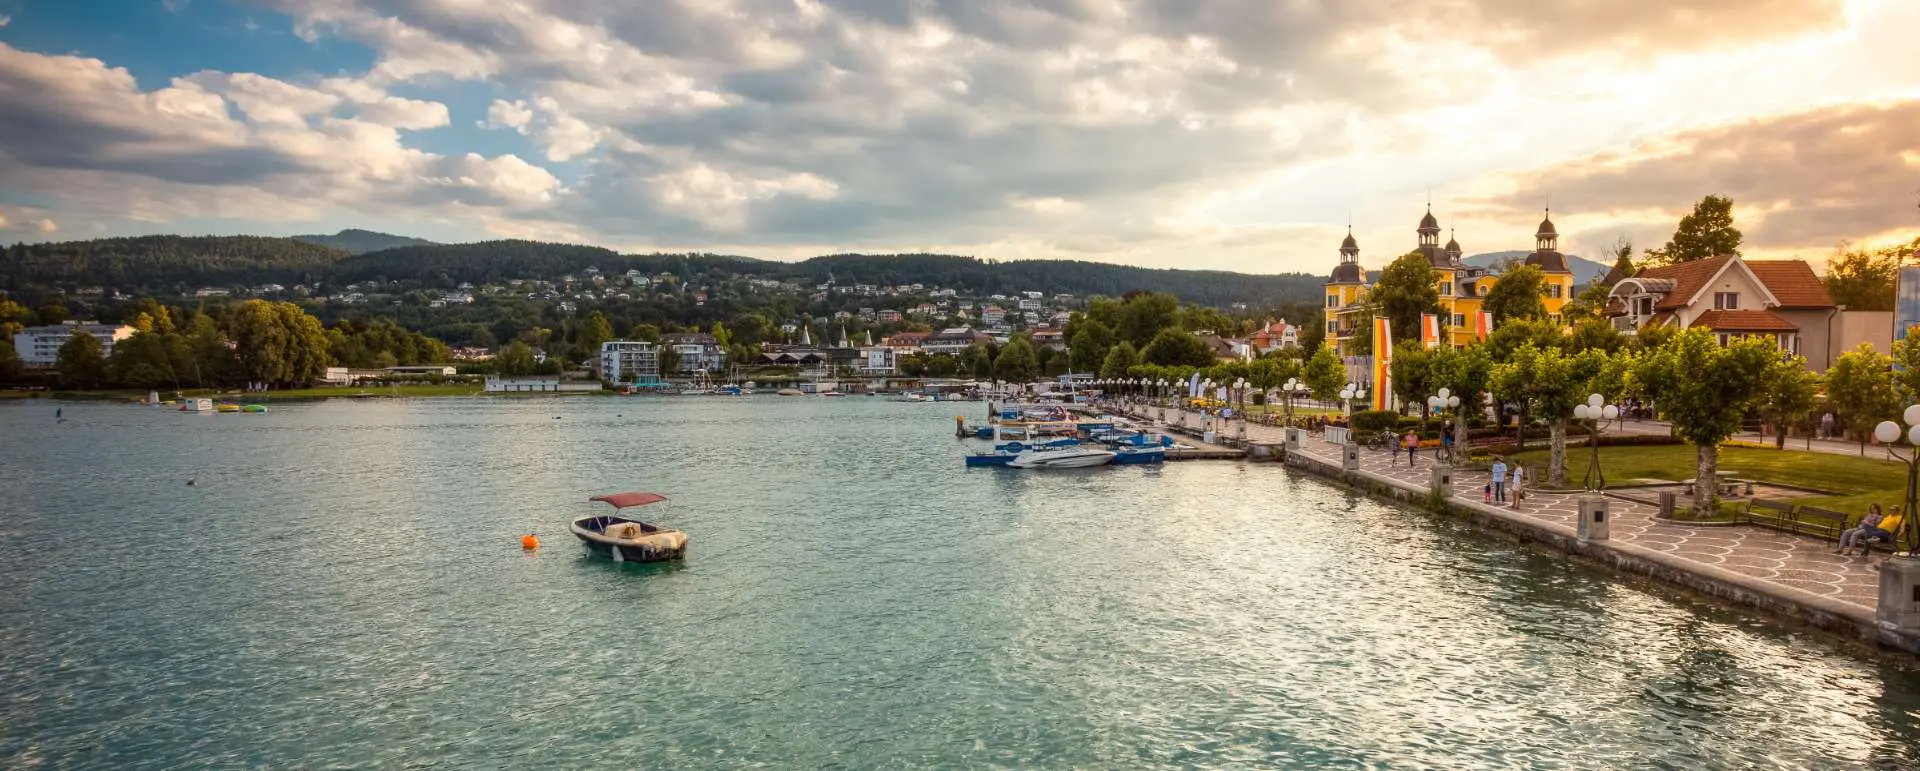 Wörthersee - the destination for families